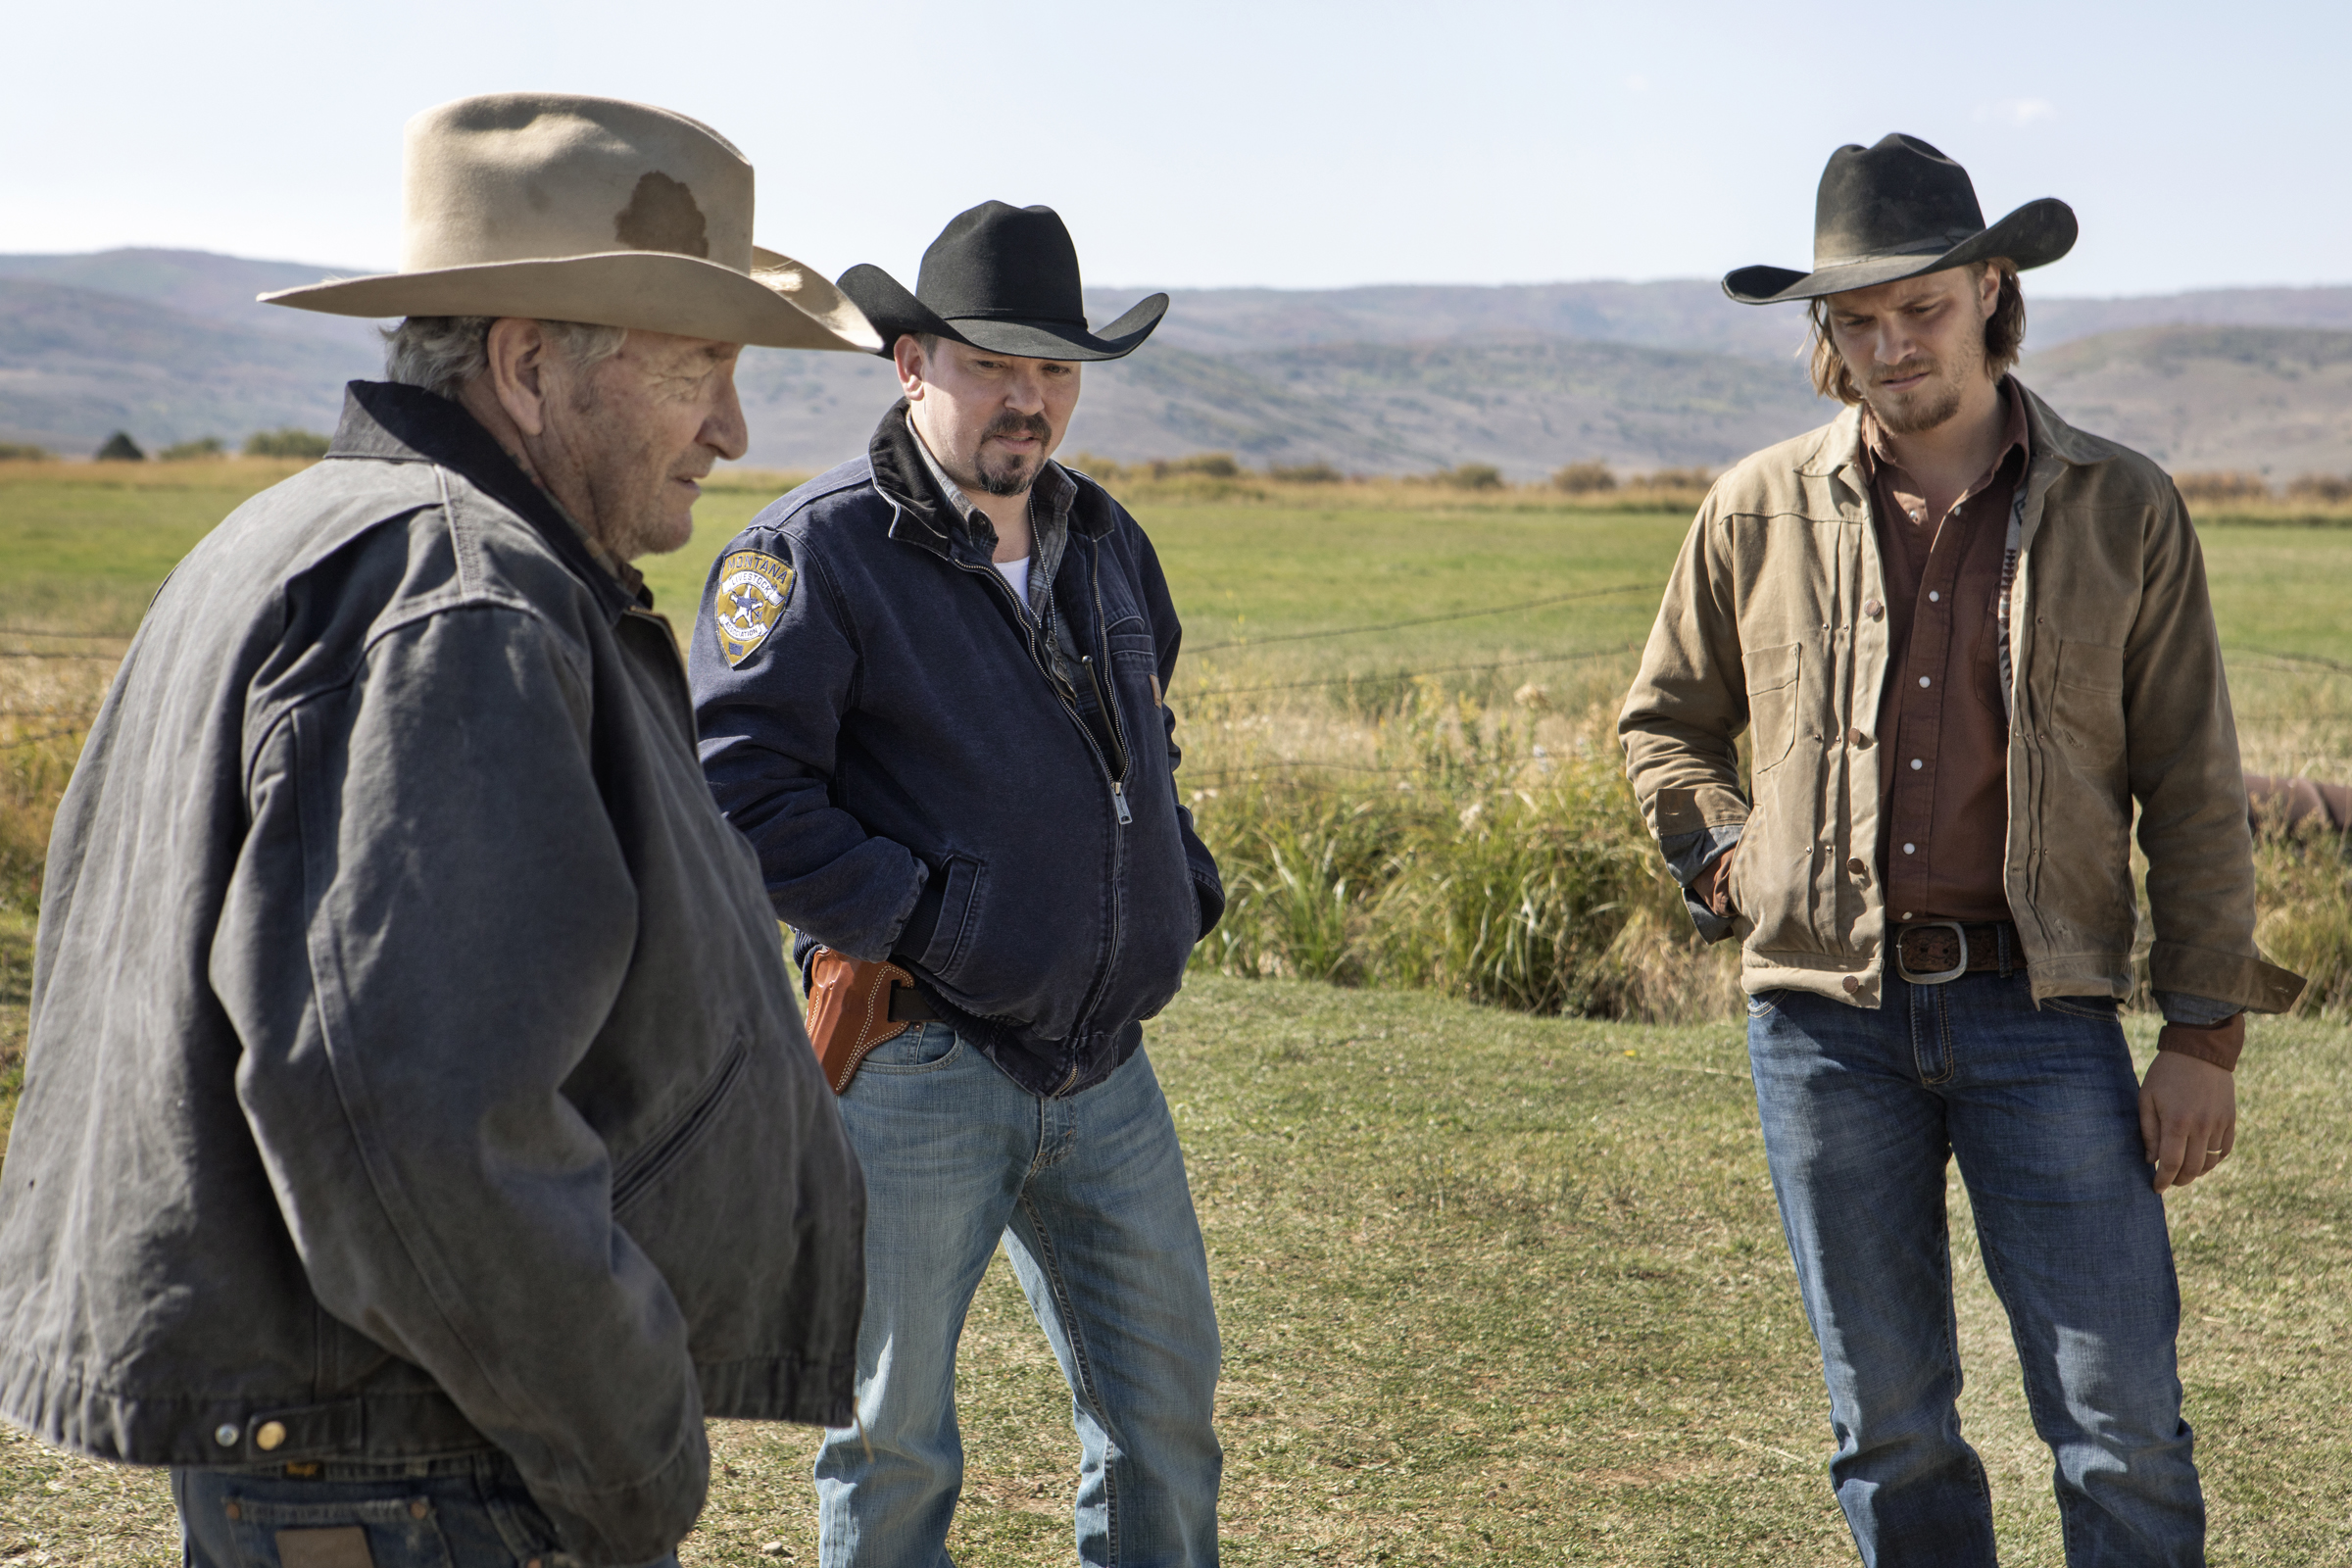 Photos From 'Yellowstone' Season 2, Episode 4 'Only Devils L...